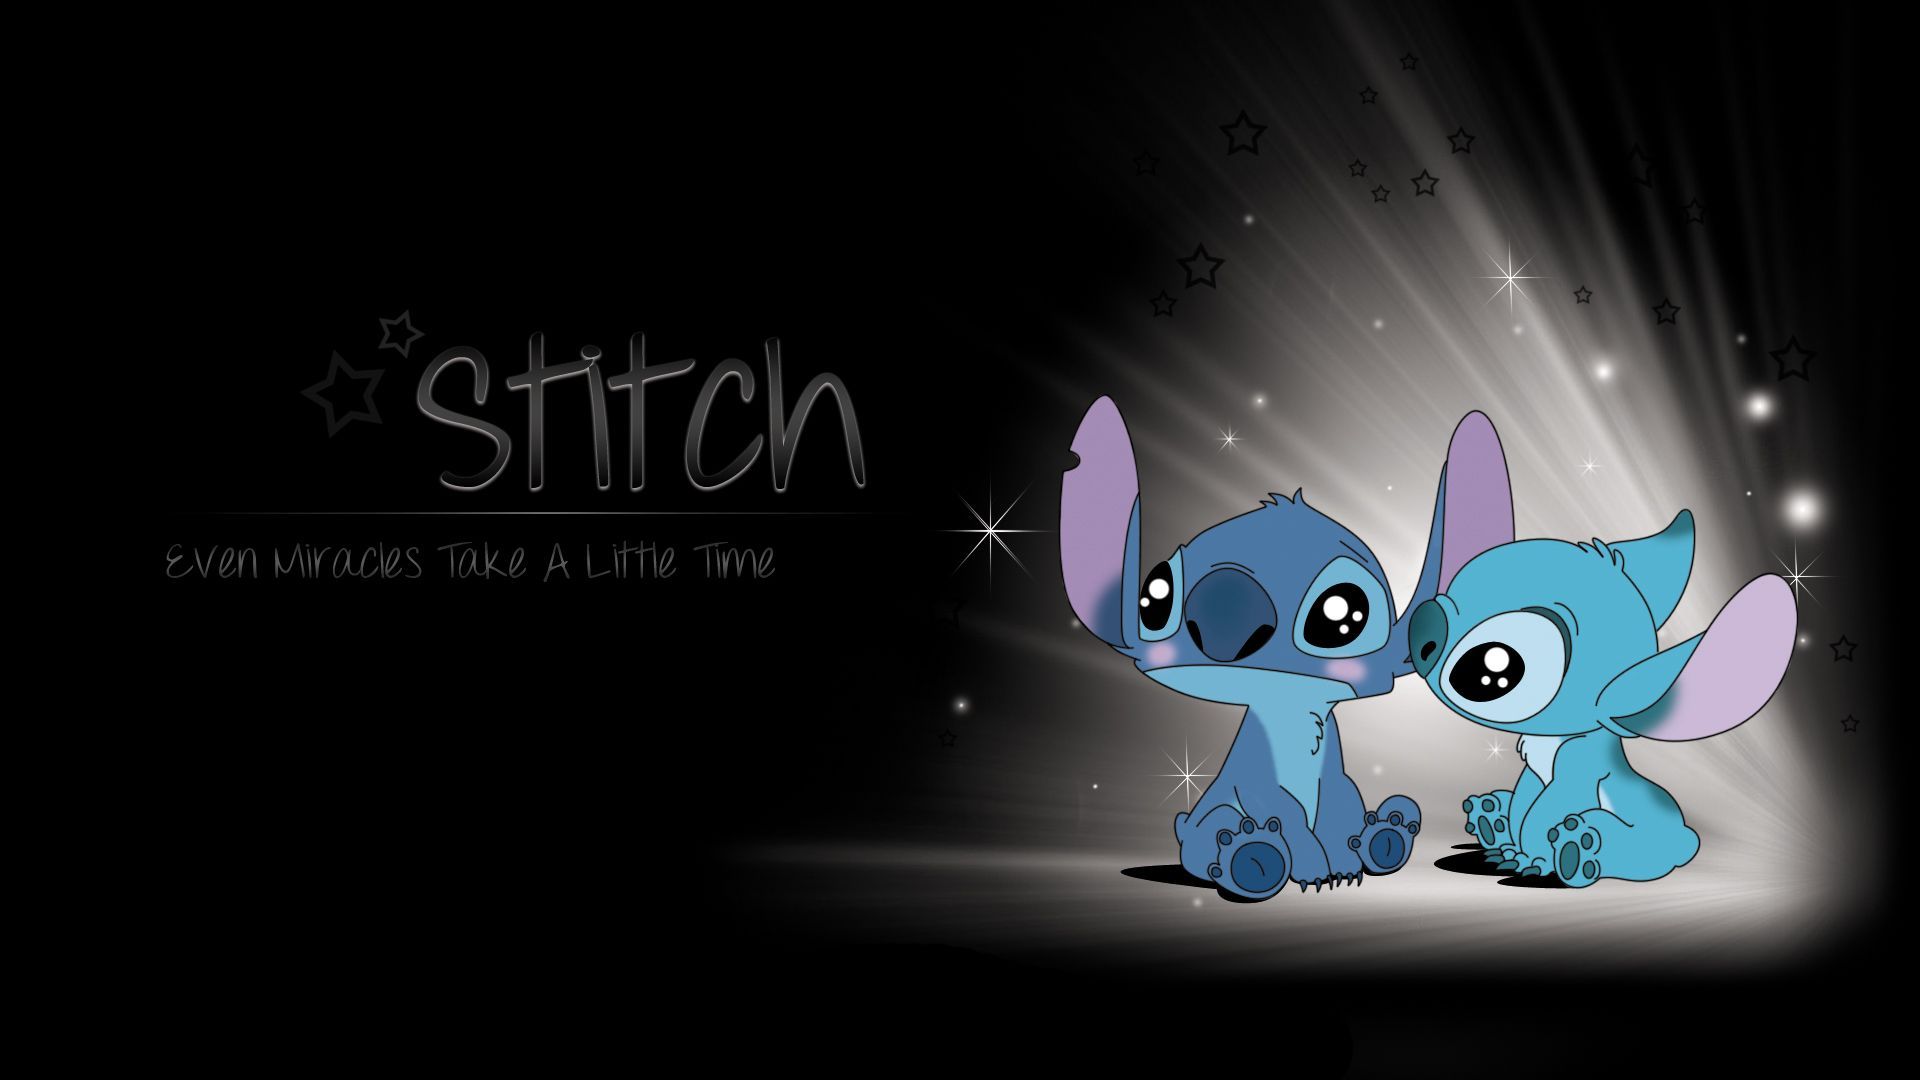 Stitch wallpaper 1920x1080 for android 67 images - Stitch